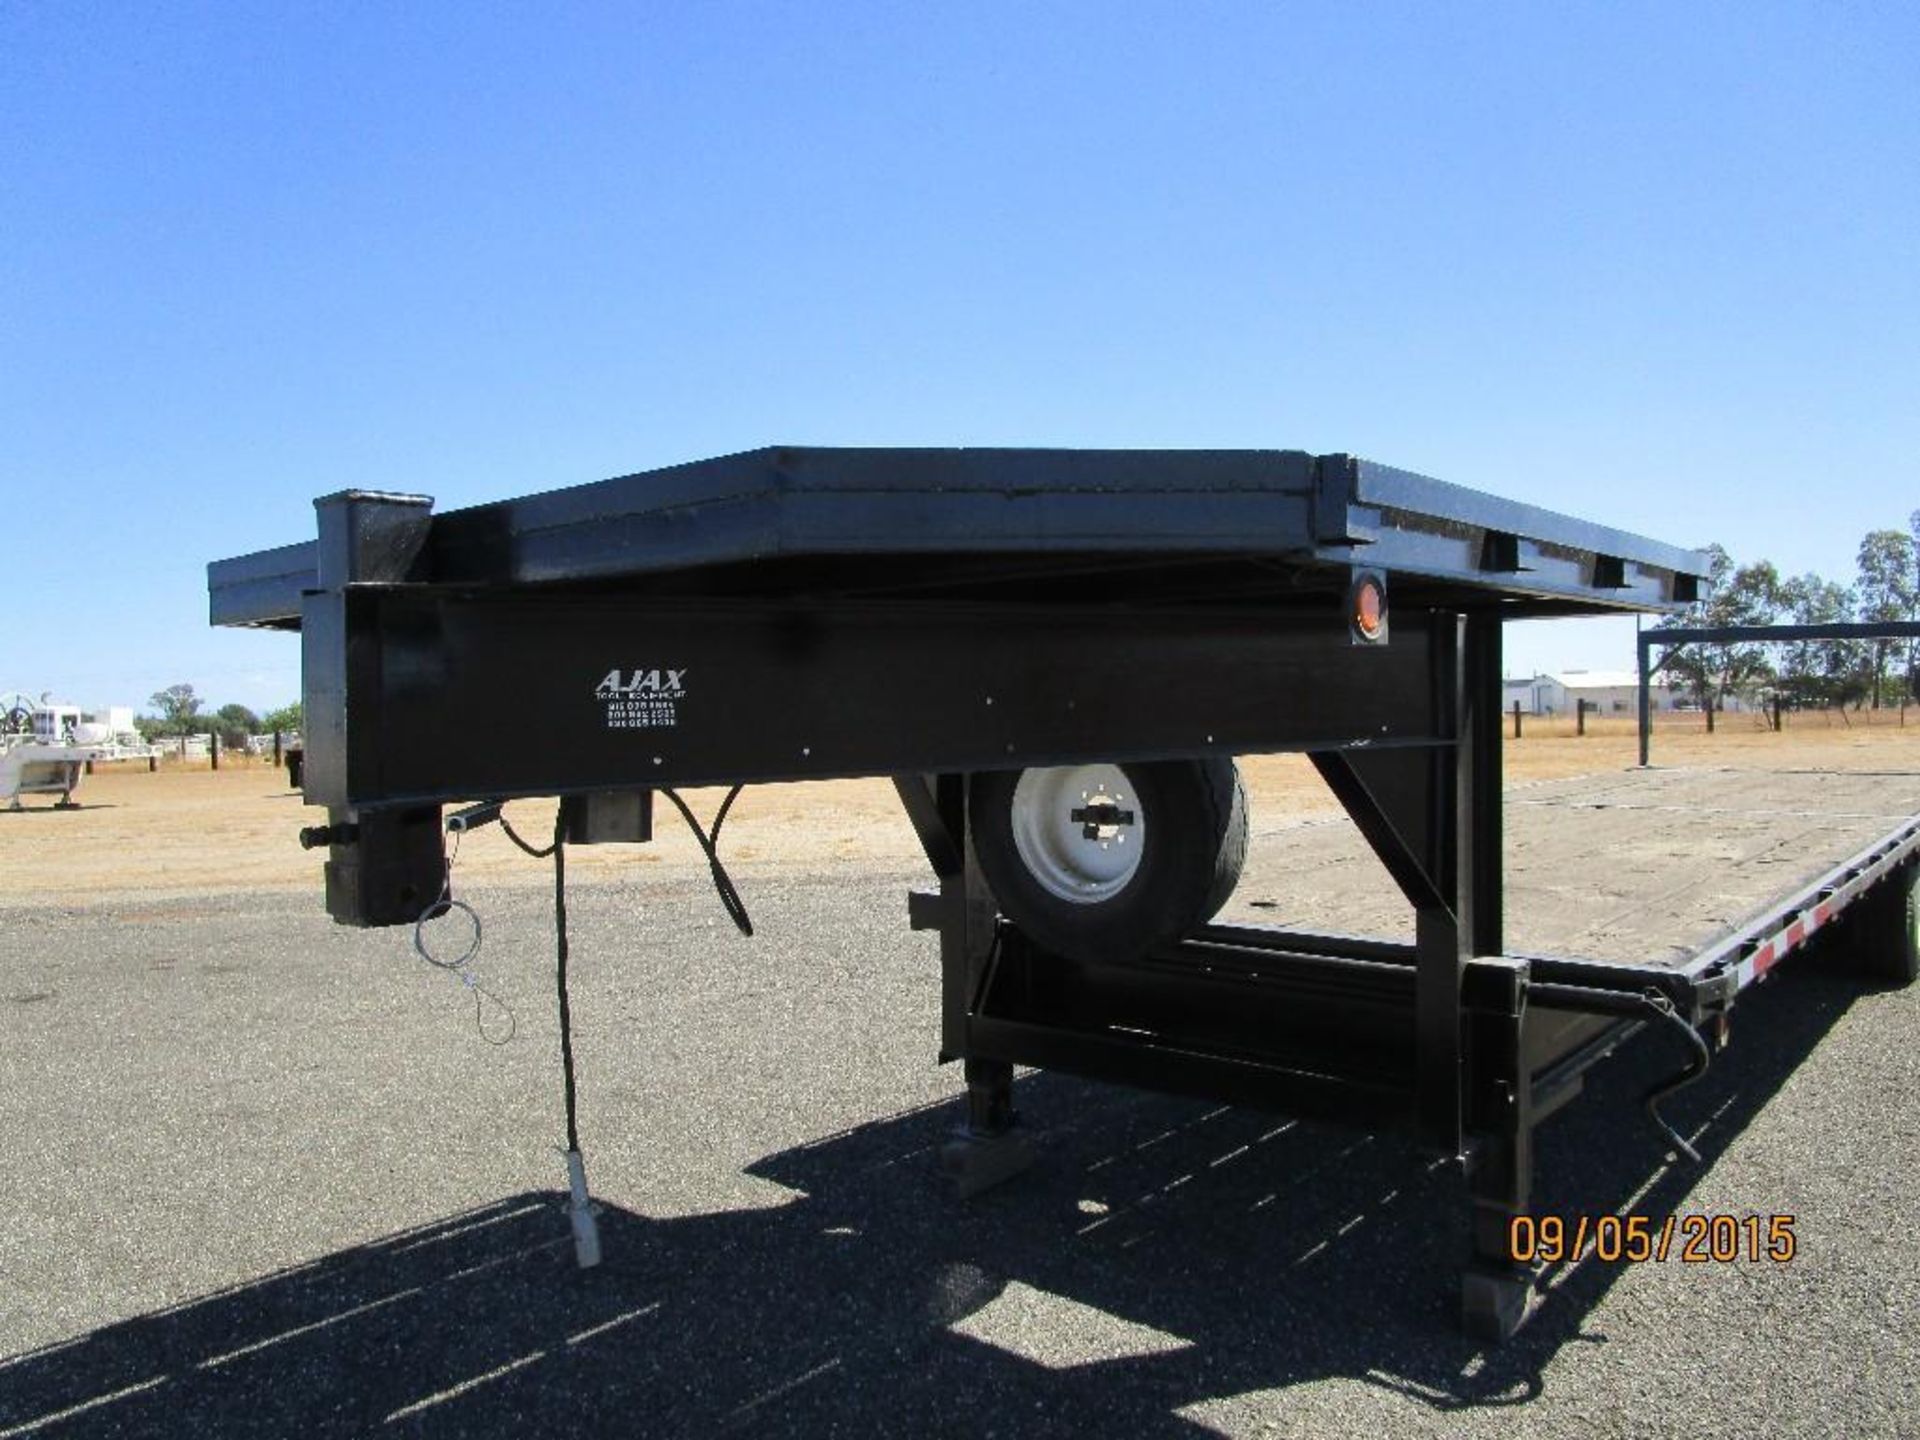 Wood Deck, Bottom 32', Top 8' GVWR 24,000 lbs. Equipped with: Stake Pockets Electric Brakes Tires - Image 6 of 8